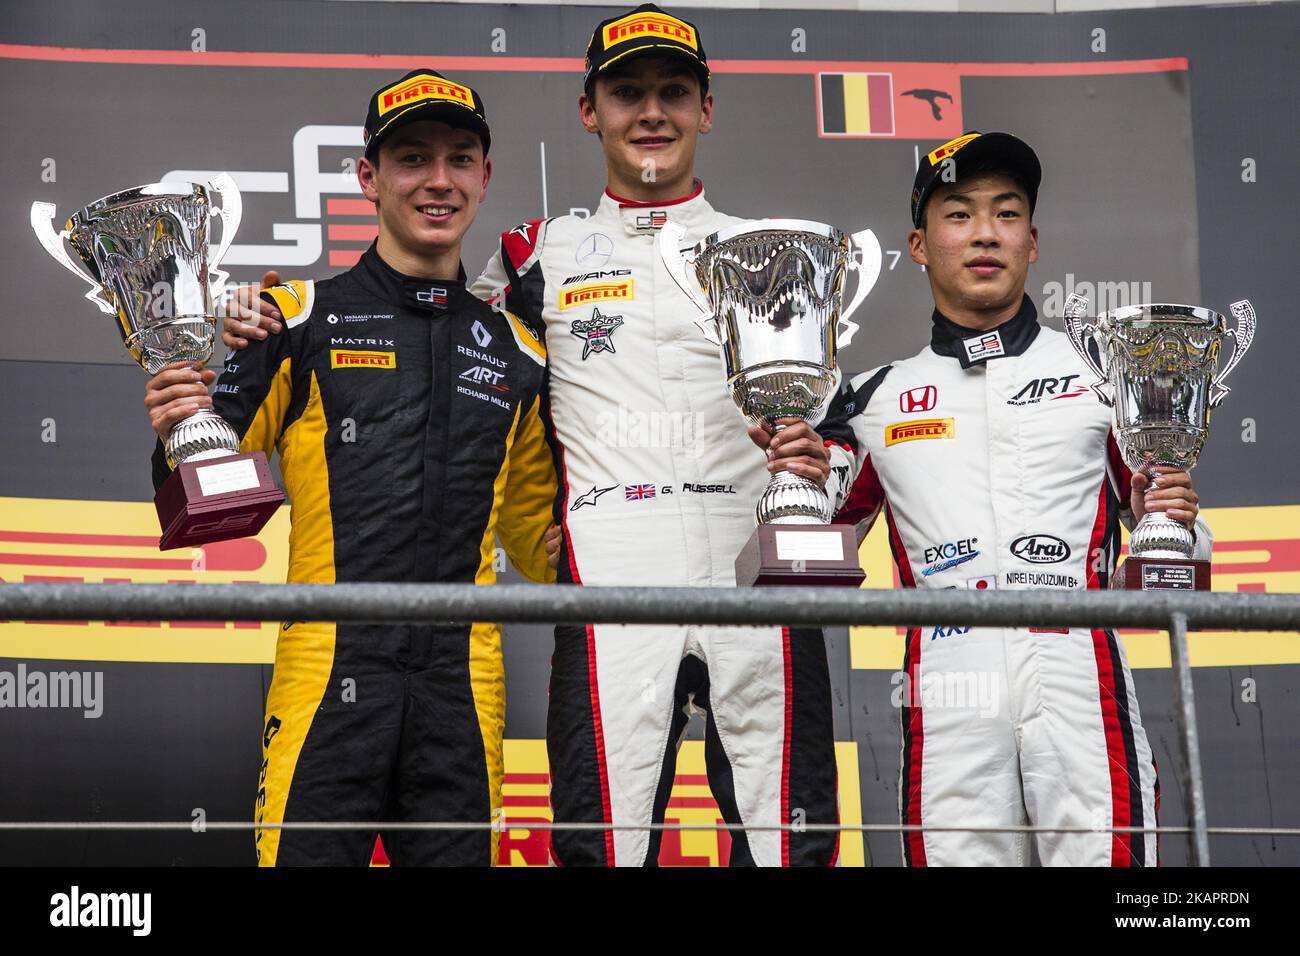 AITKEN Jack from Great Britain of Art Grand Prix Renault young drivers program and RUSSELL George from Great Britain of Art Grand Prix Mercedes young drivers program and FUKUZUMI Nirei from Japan of Art Grand Prix during the GP3 Race 1 podium at Circuit de Spa-Francorchamps on August 26, 2017 in Spa, Belgium. (Photo by Xavier Bonilla/NurPhoto) Stock Photo